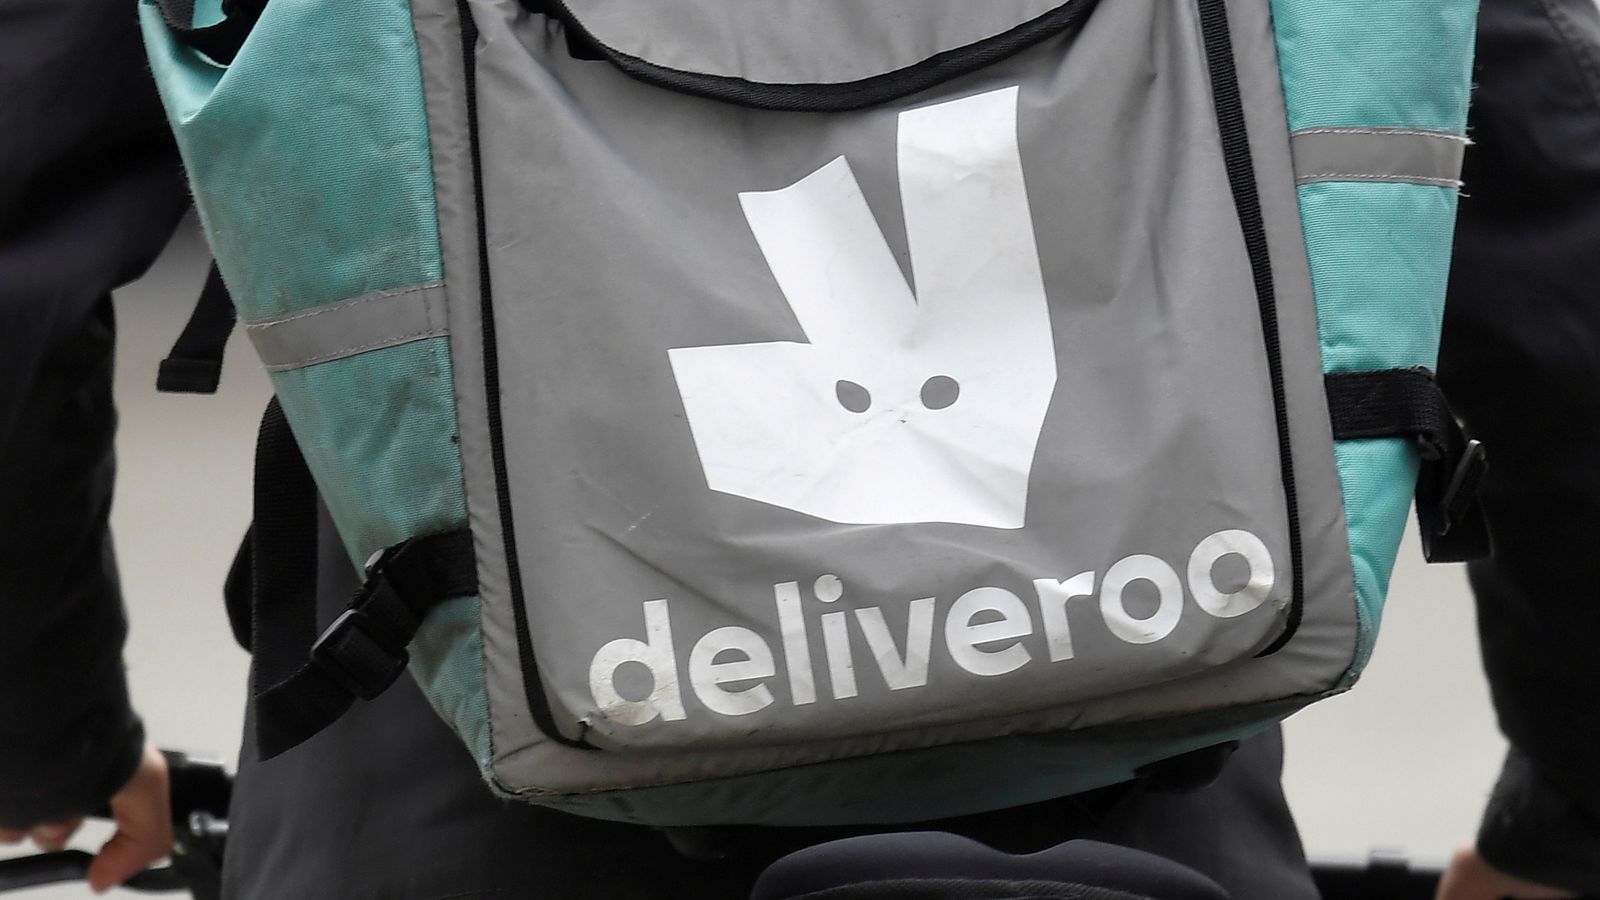 Deliveroo hops to Asda expansion in grocery drive